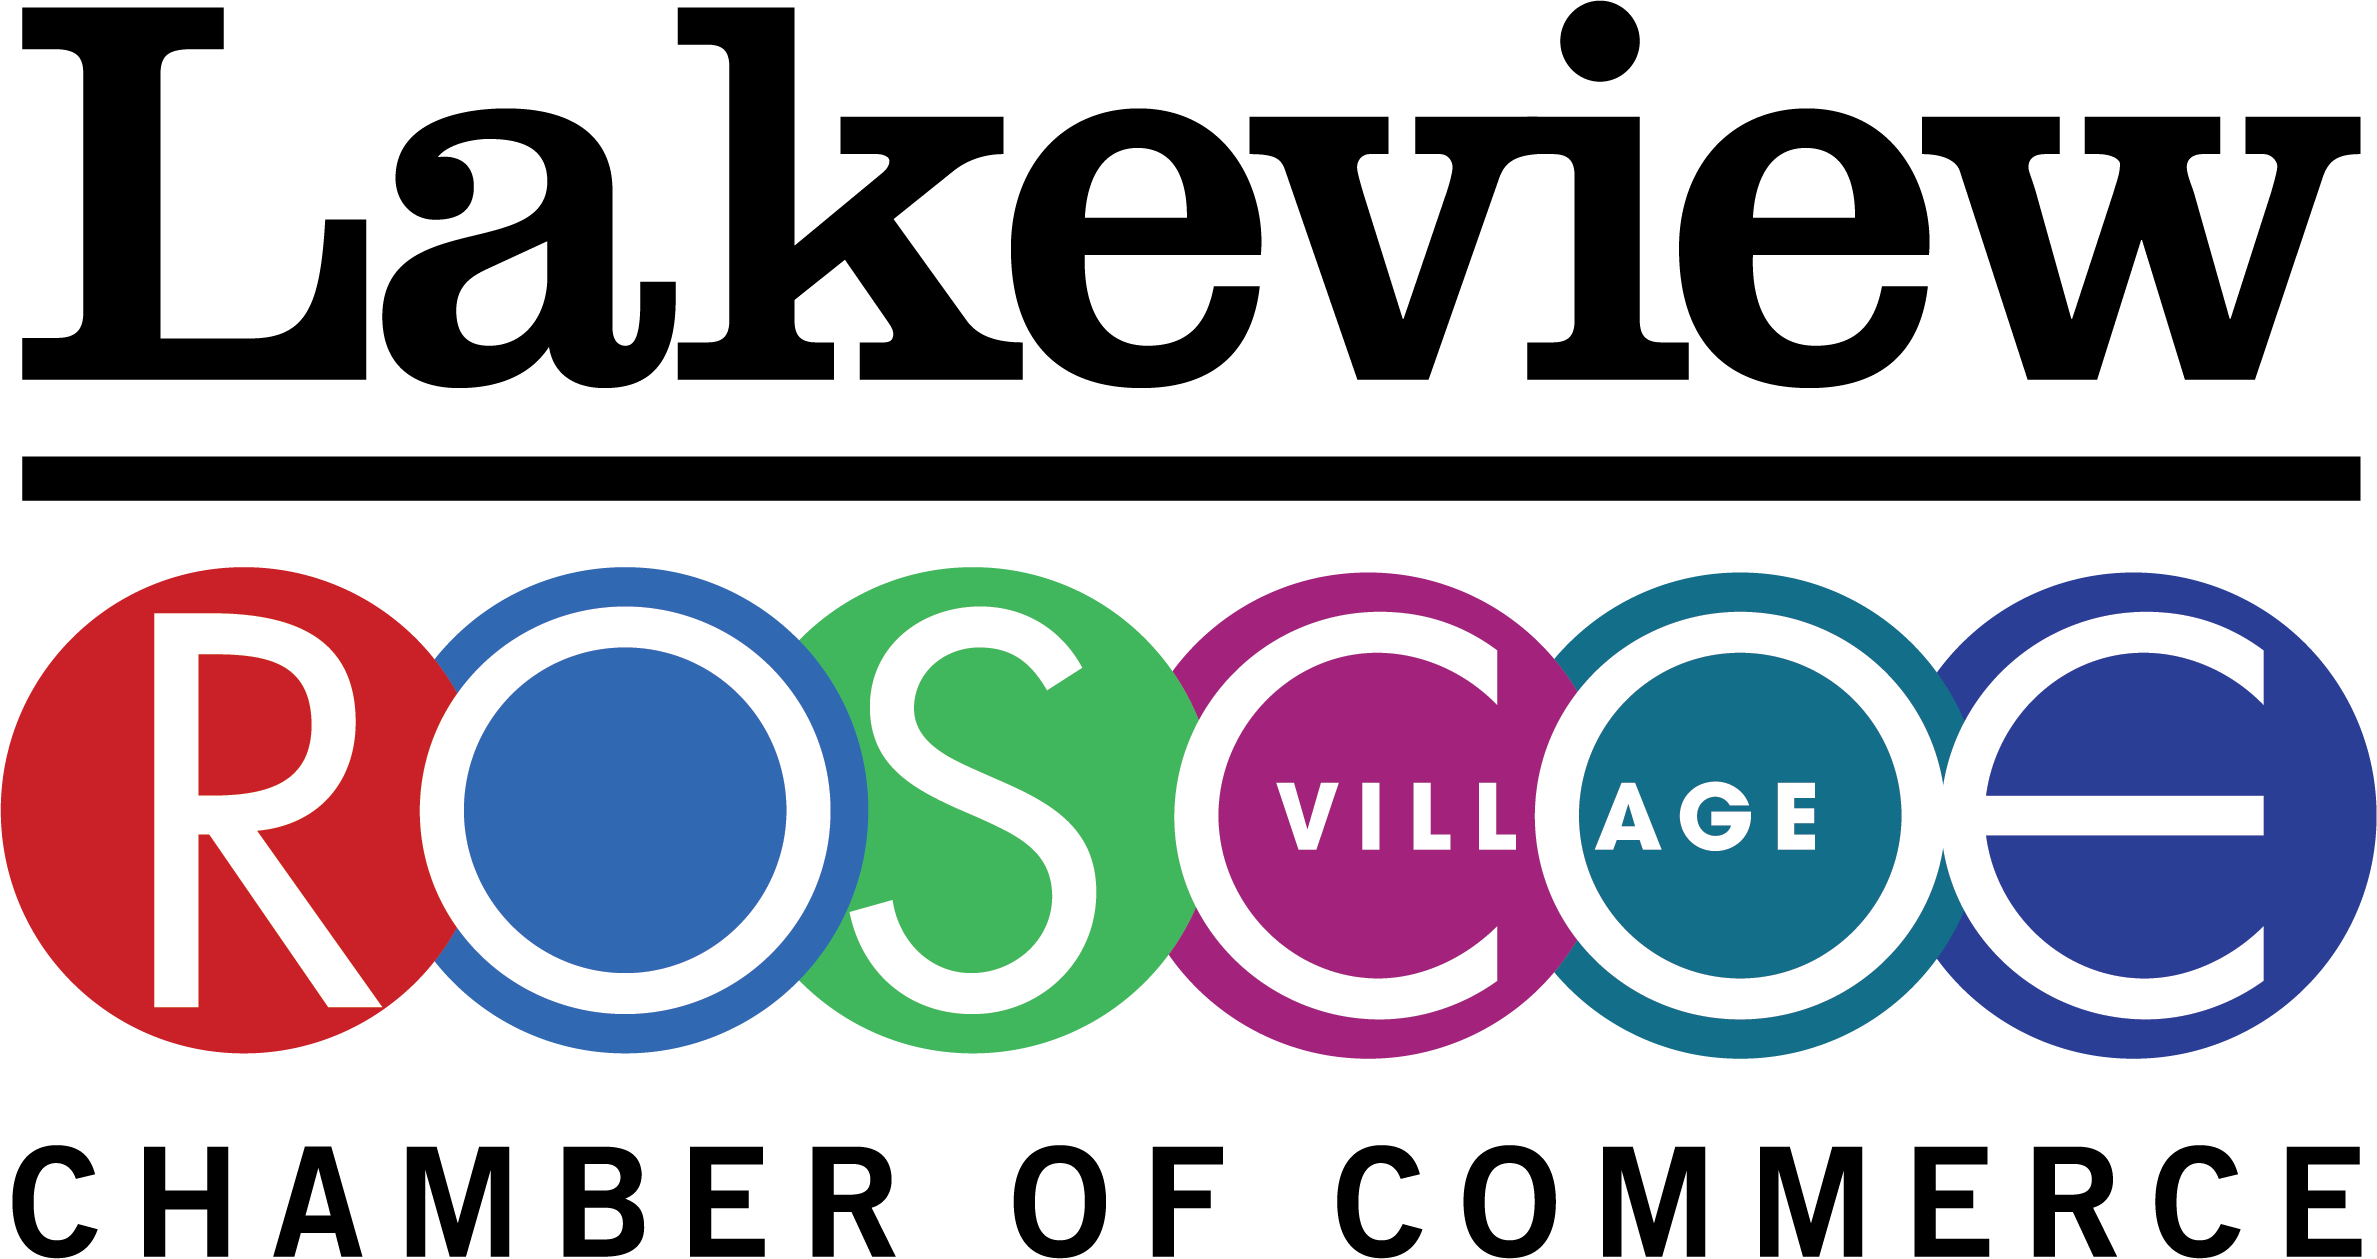 Lakeview Roscoe Village Chamber of Commerce Logo